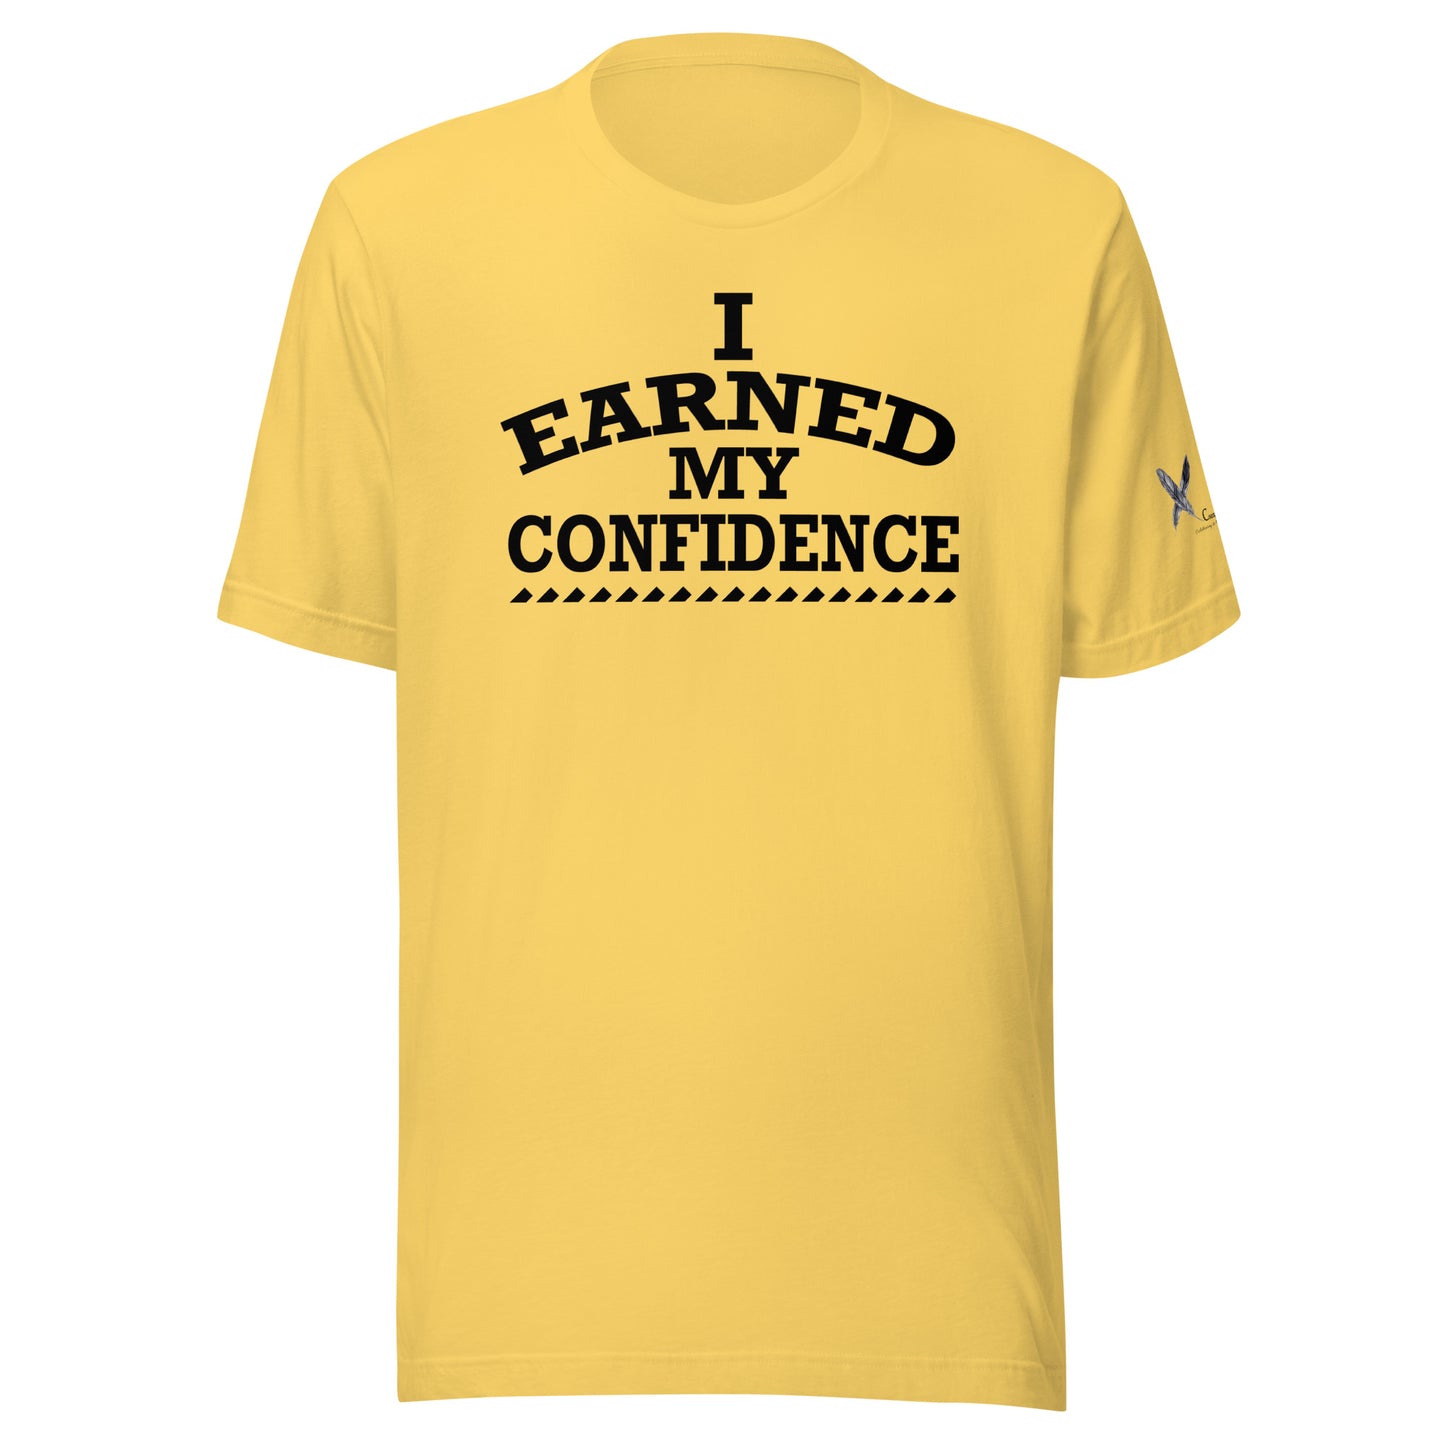 I EARNED My Confidence Women's Empowerment T-Shirt